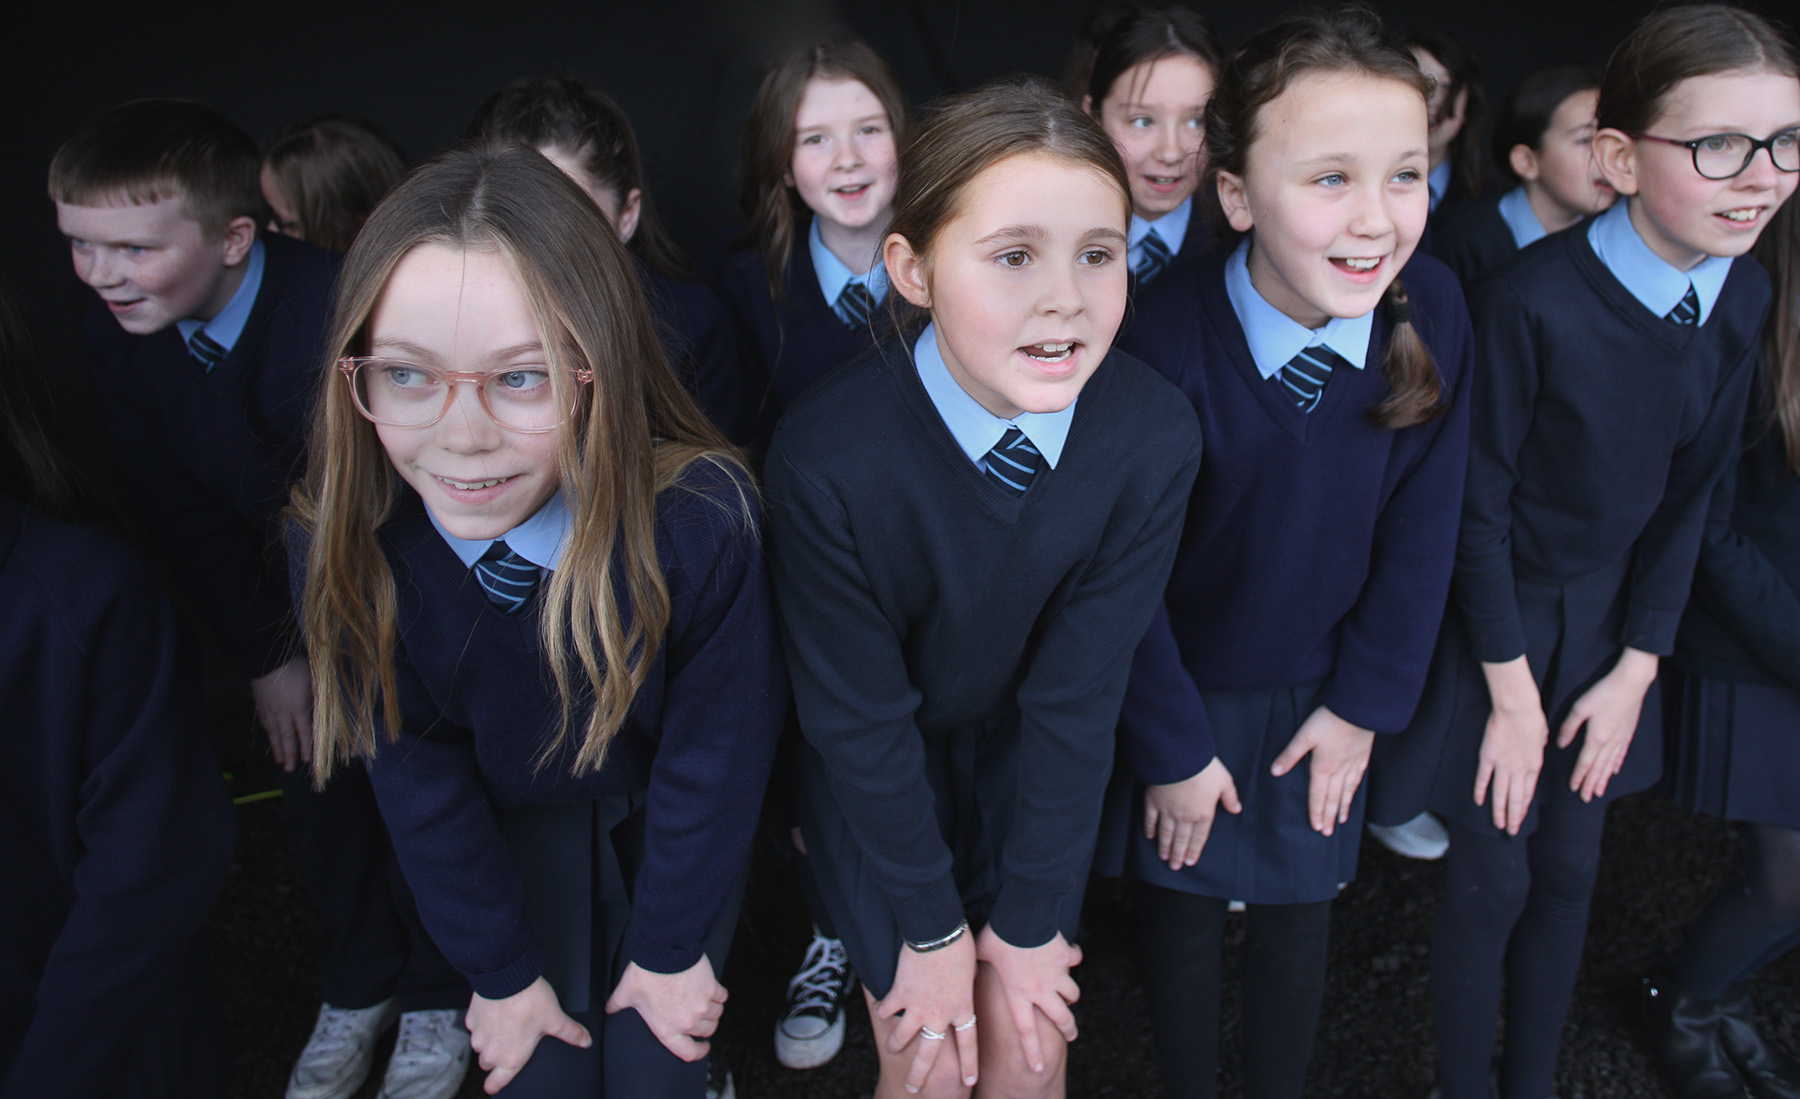 SINGING: Pupils from Good Shepherd Primary School sang at the event